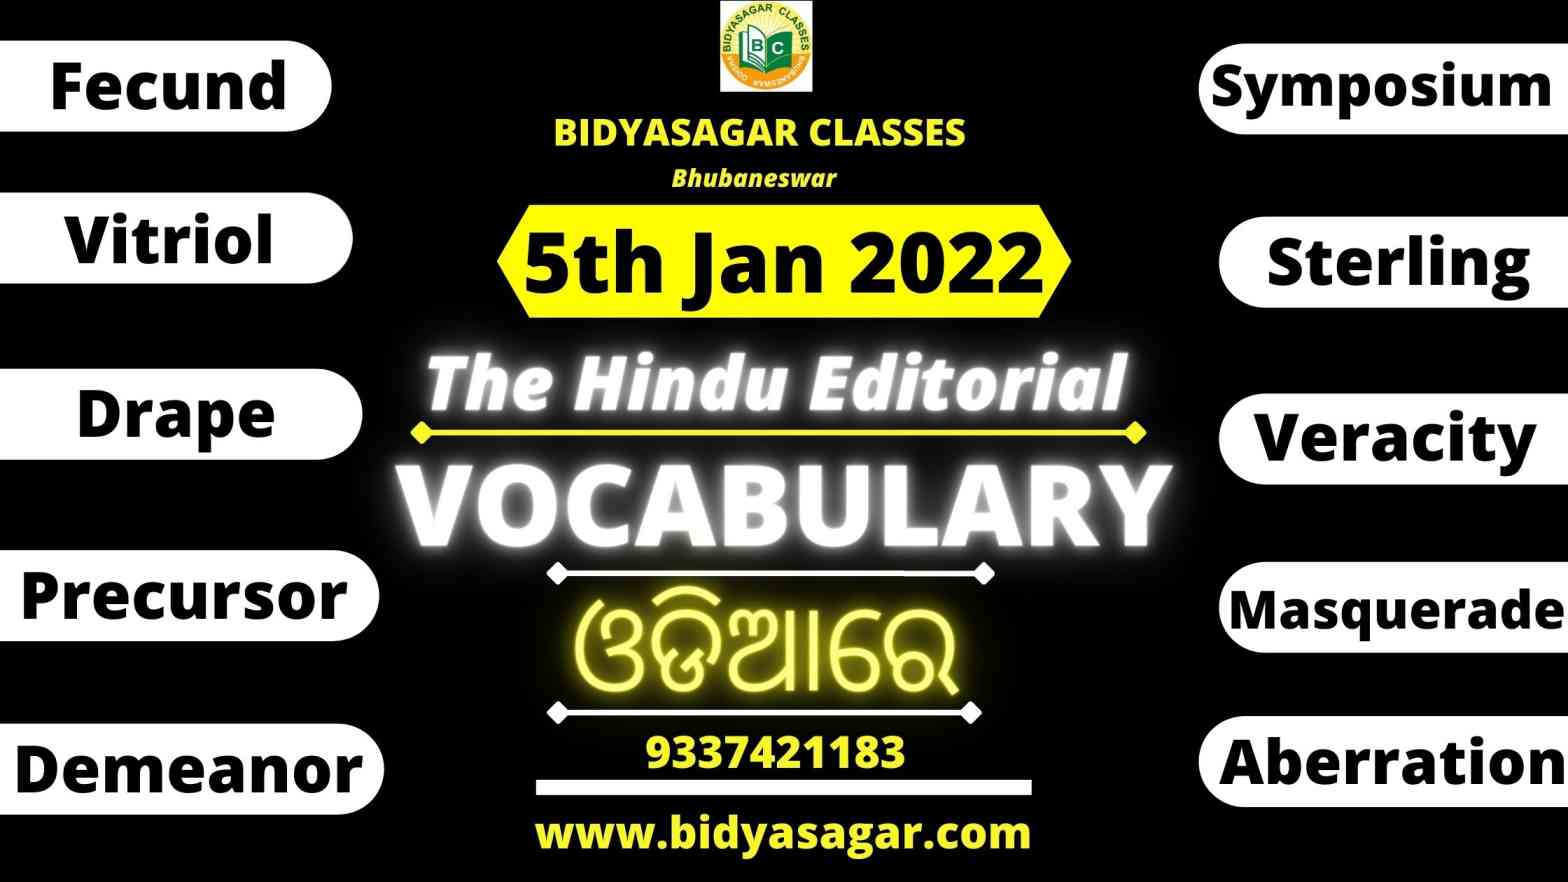 The Hindu Editorial Vocabulary of 5th January 2022